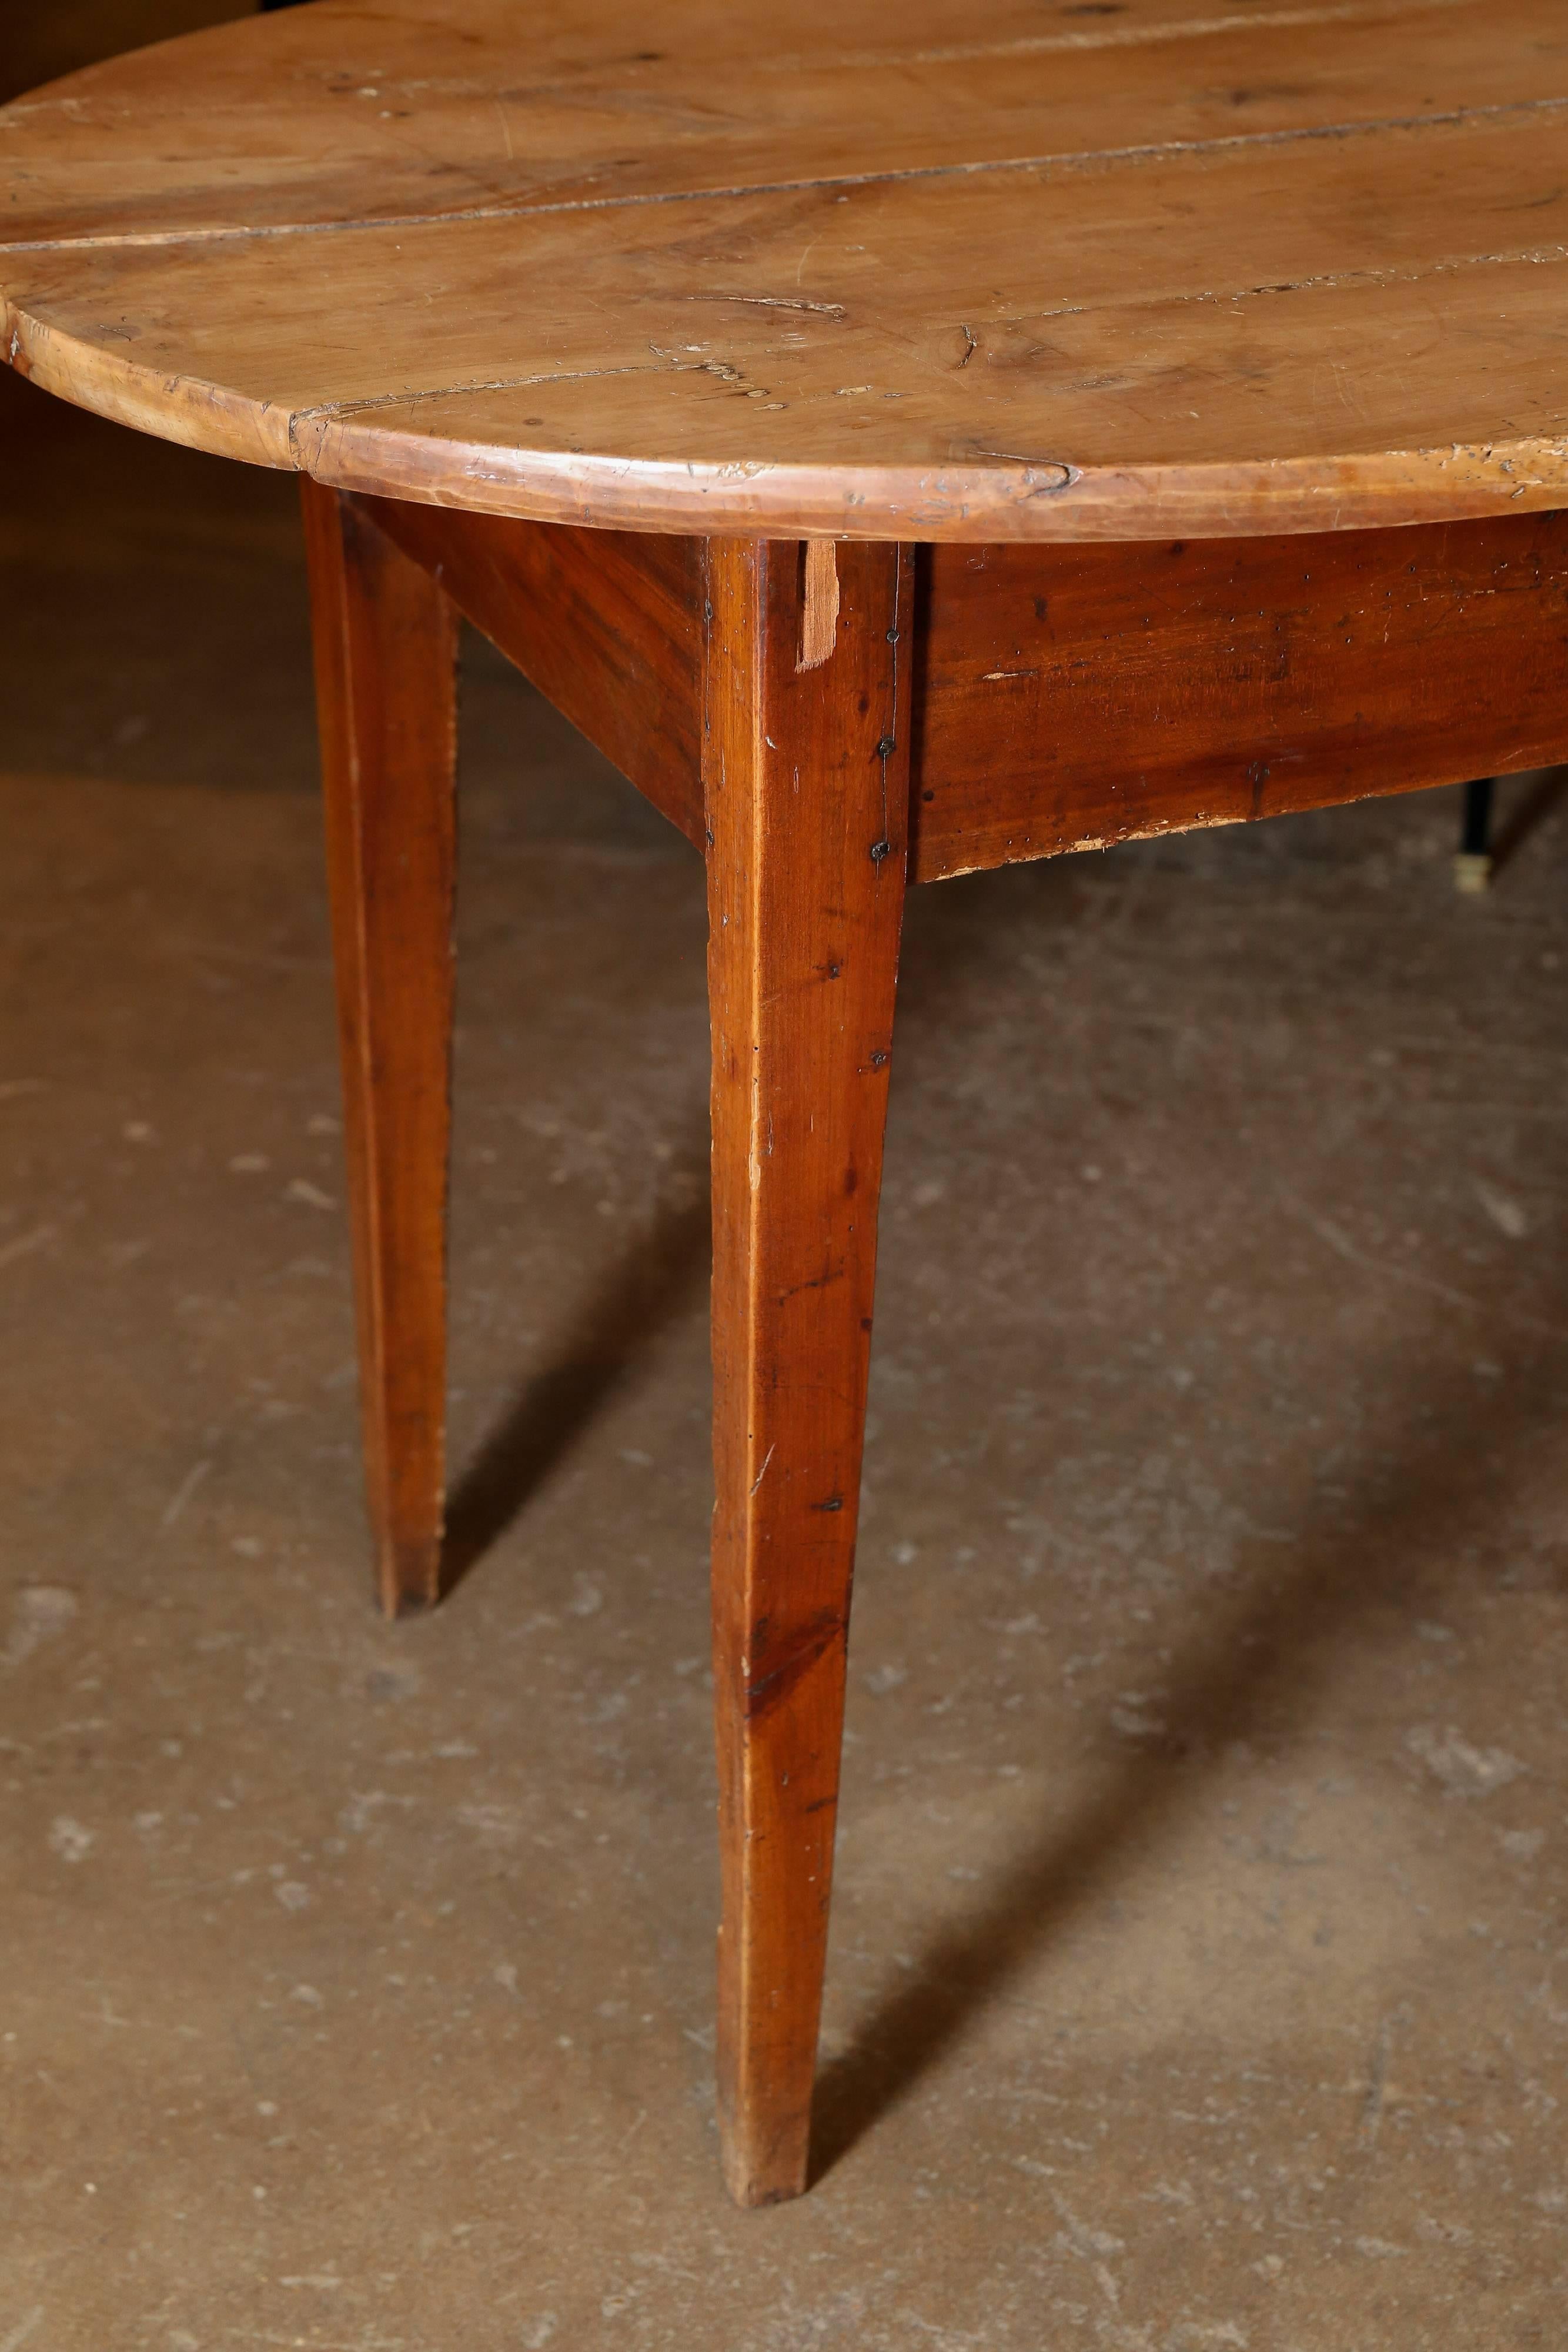 Rustic cherry oval table with darker base and sun bleached top. Clean simple lines.